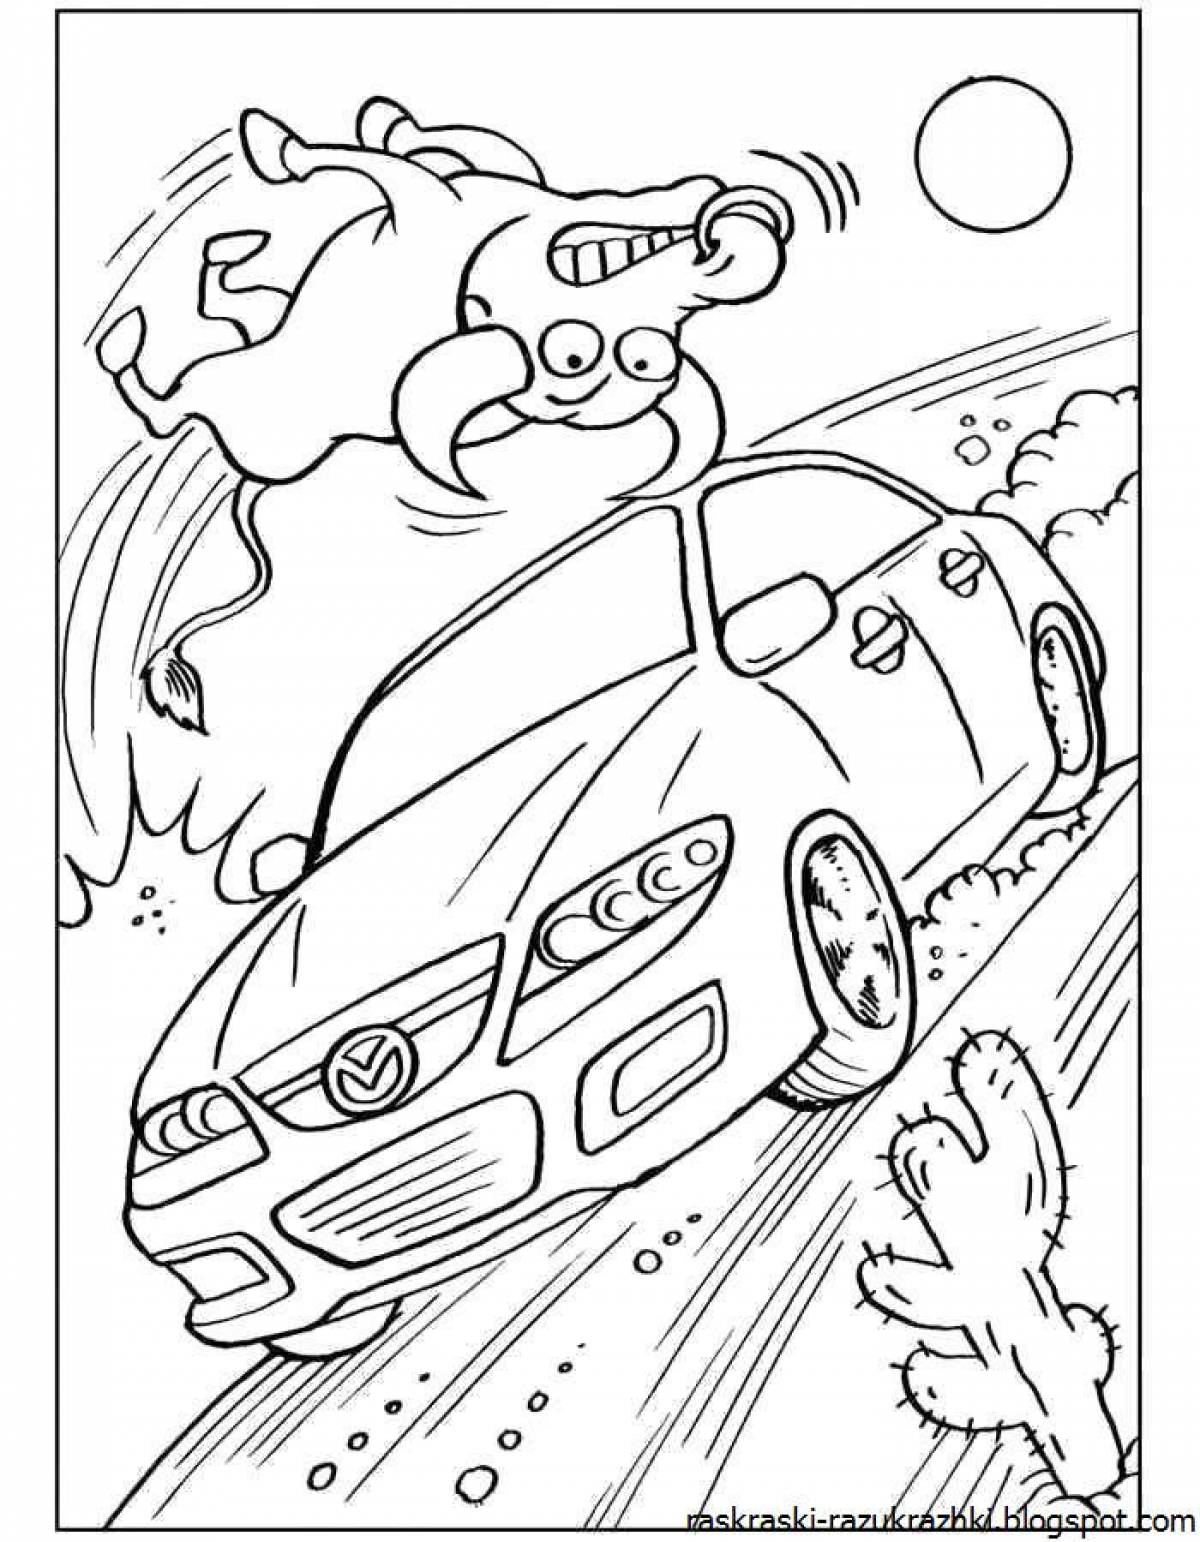 Exciting car coloring pages for boys 6-7 years old